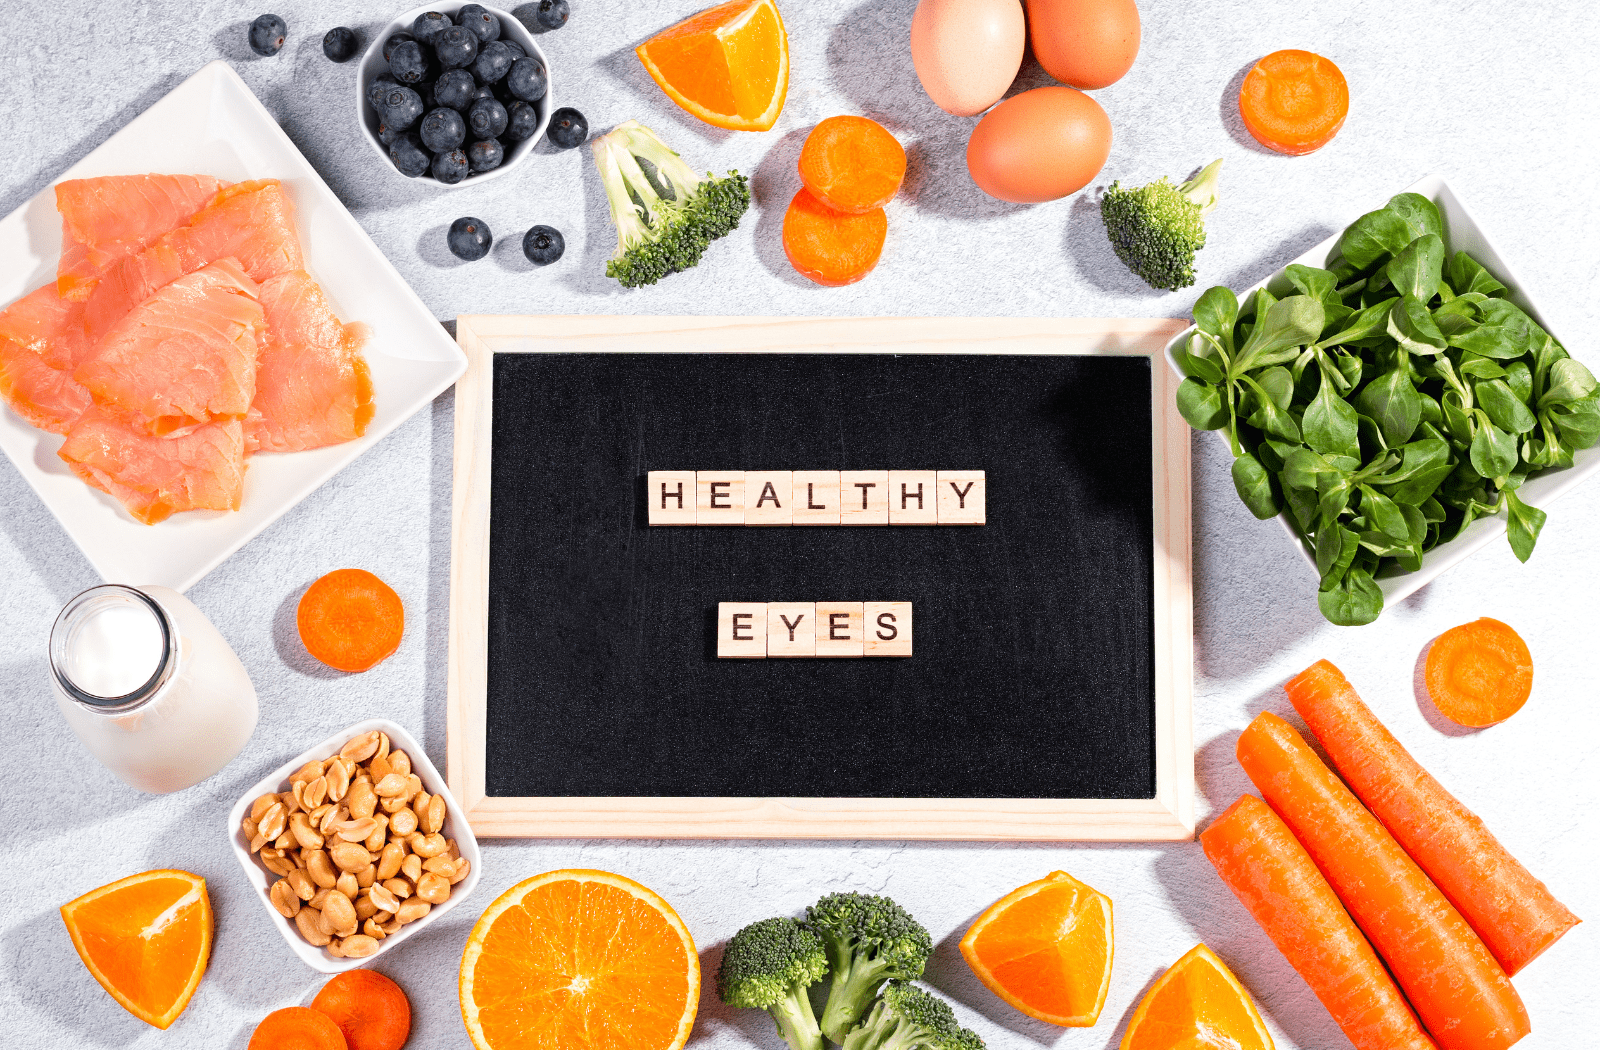 A sign with lettered tiles across it, spelling out "healthy eyes," surrounded by foods like spinach, fish, milk, carrots, oranges, blueberries, and more